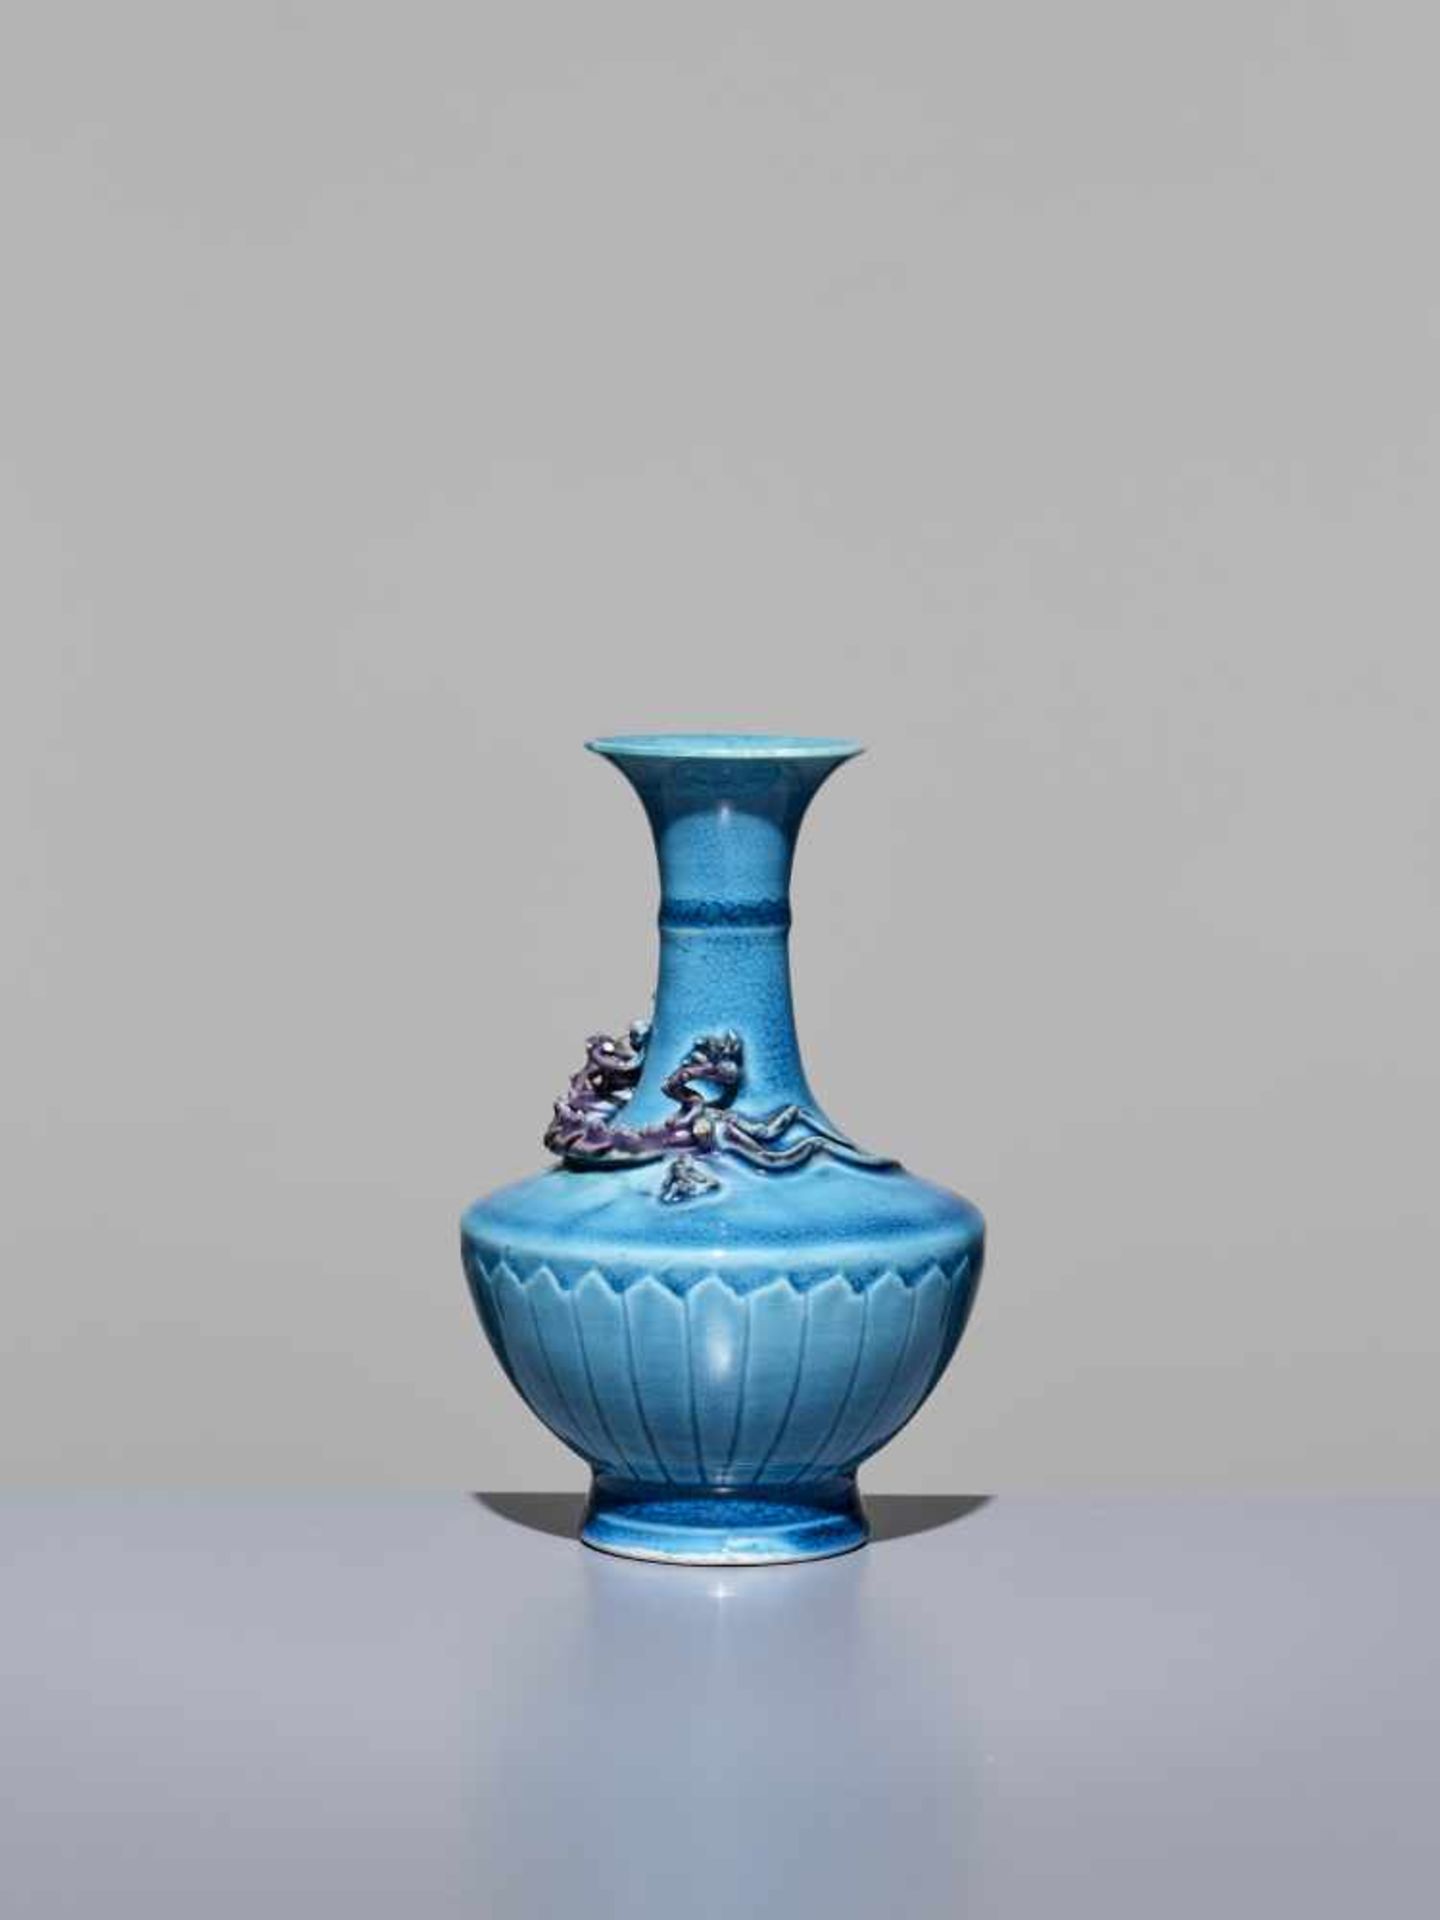 A CHILONG VASE, EARLY 18TH CENTURYChina, 1700-1750. The aubergine-glazed sinuous dragon finely - Image 3 of 8